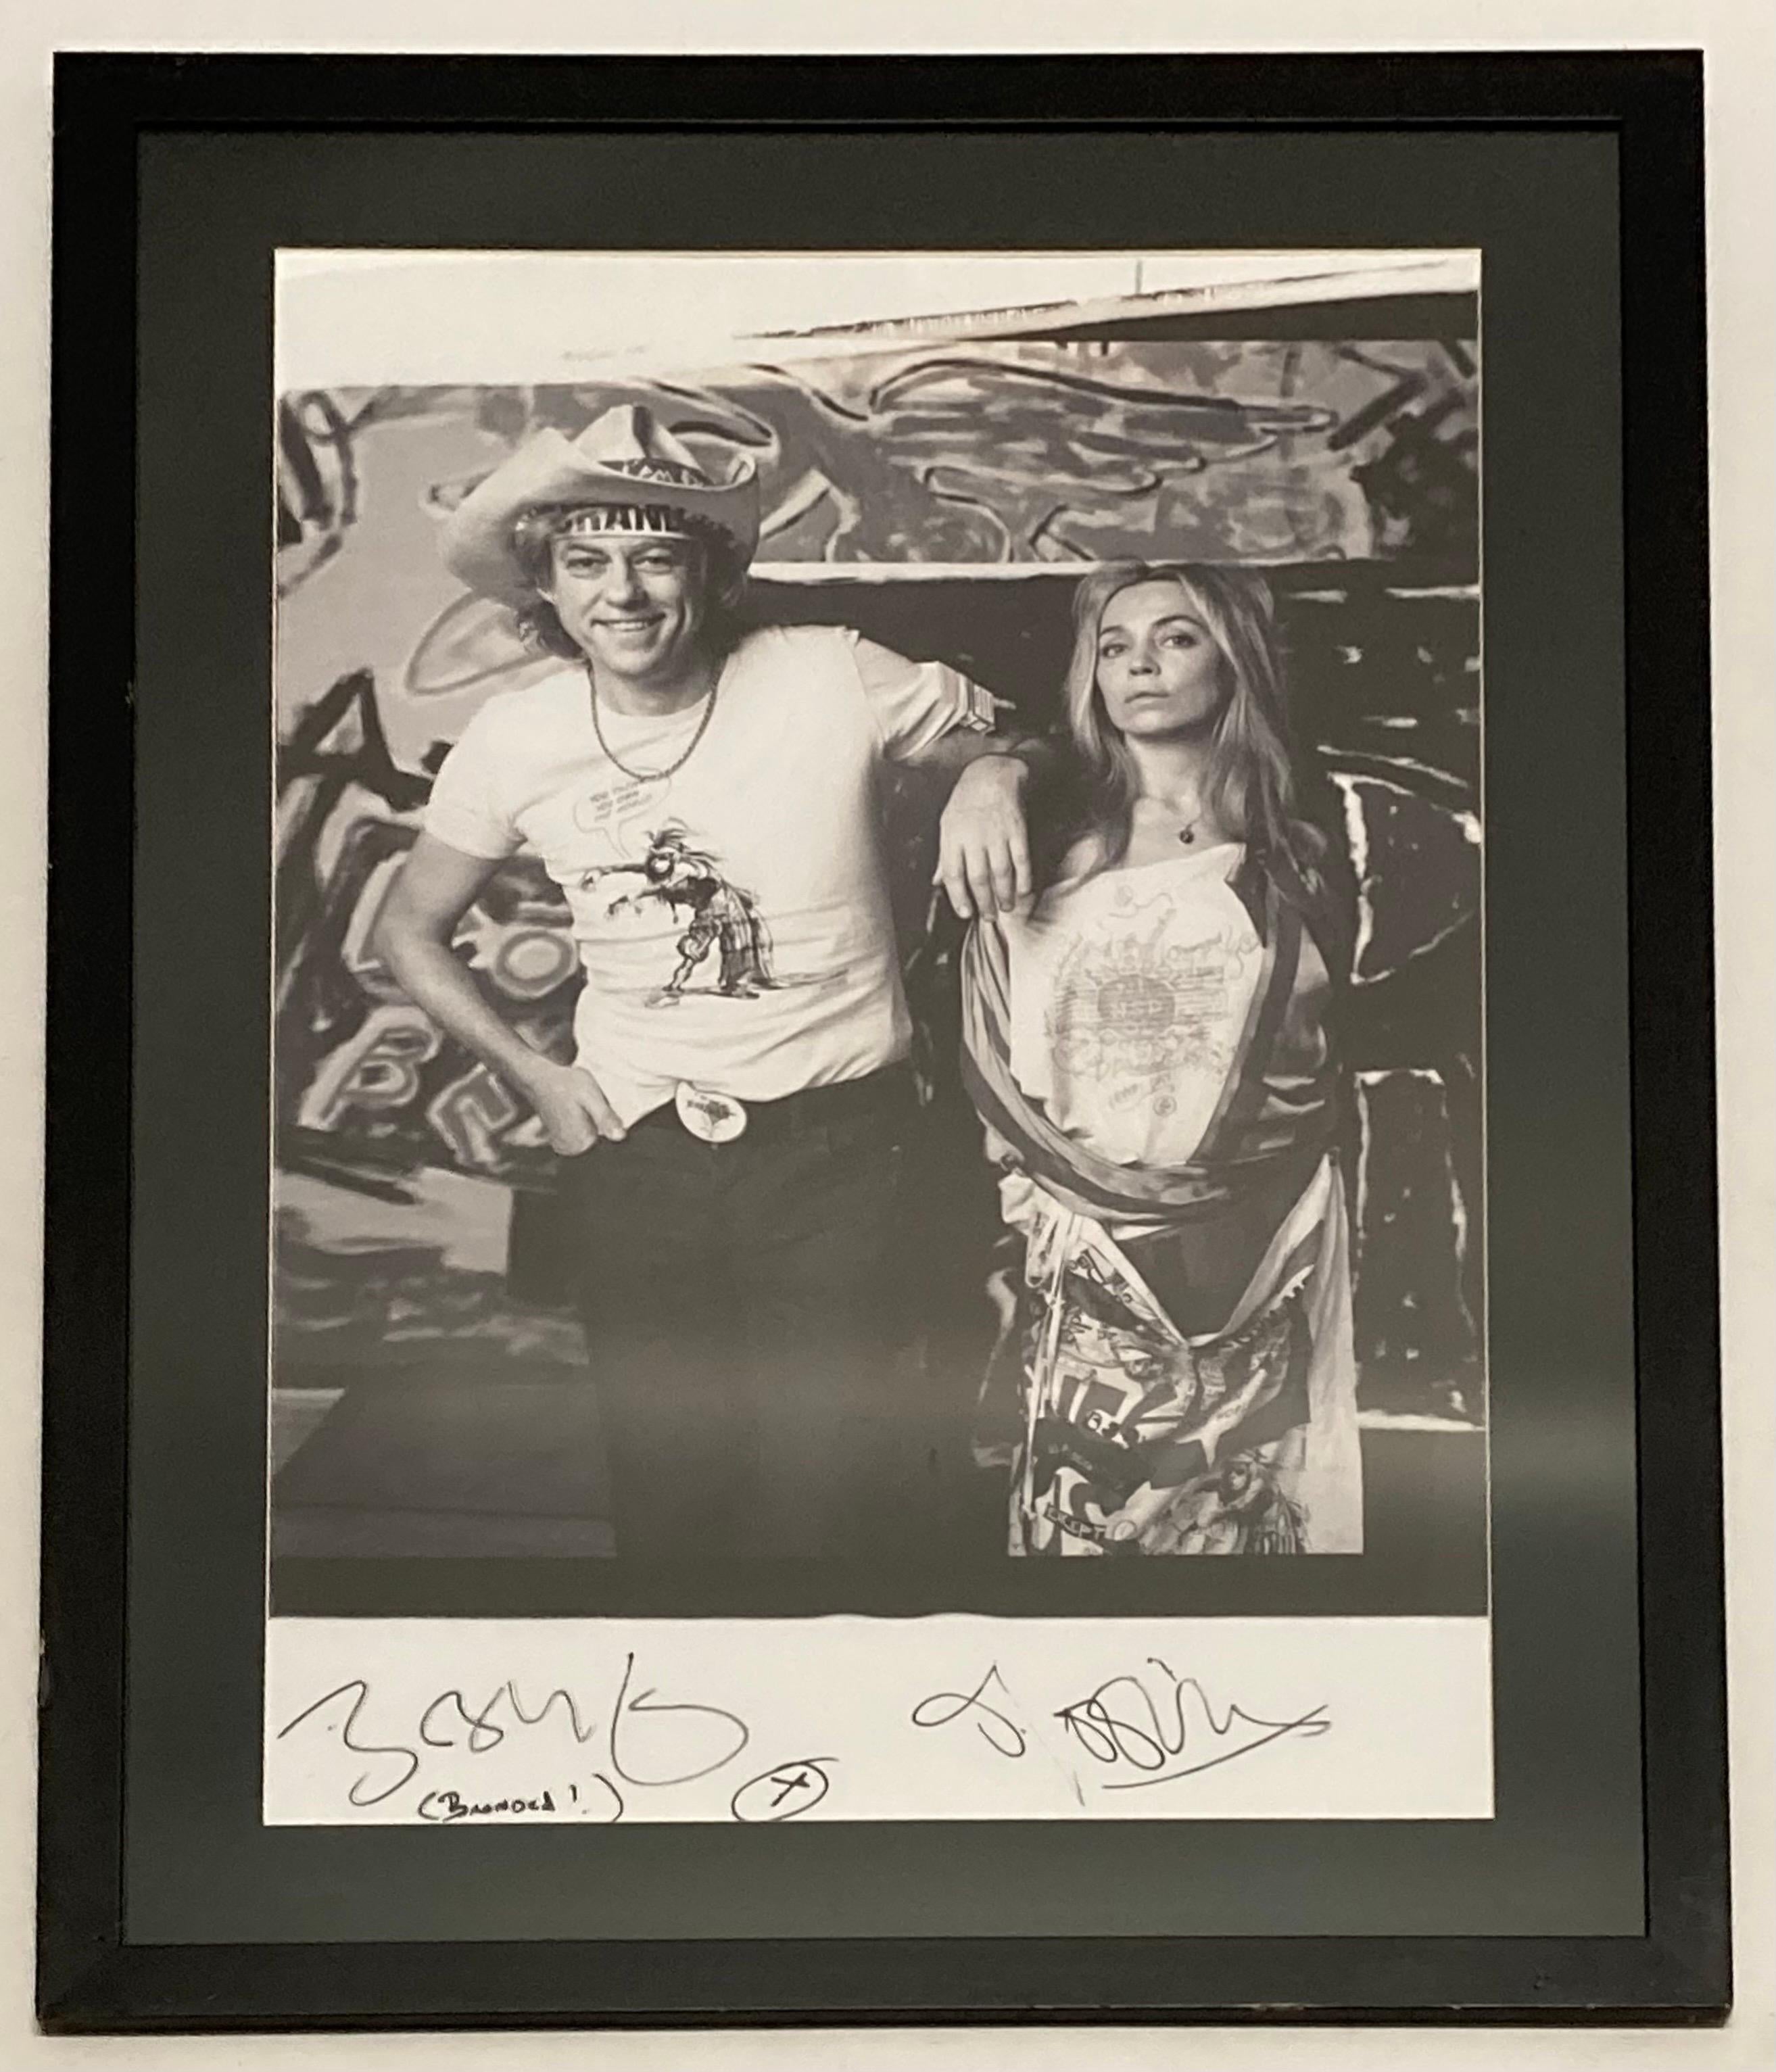 An original one-off large format Polaroid photograph of Bob Geldoff & Jeanne Marine for the Vivienne Westwood Active Resistance limited edition book produced by Opus. Photographer Zenon Texeira.
Signed by Bob Geldoff & Jeanne Marine in marker